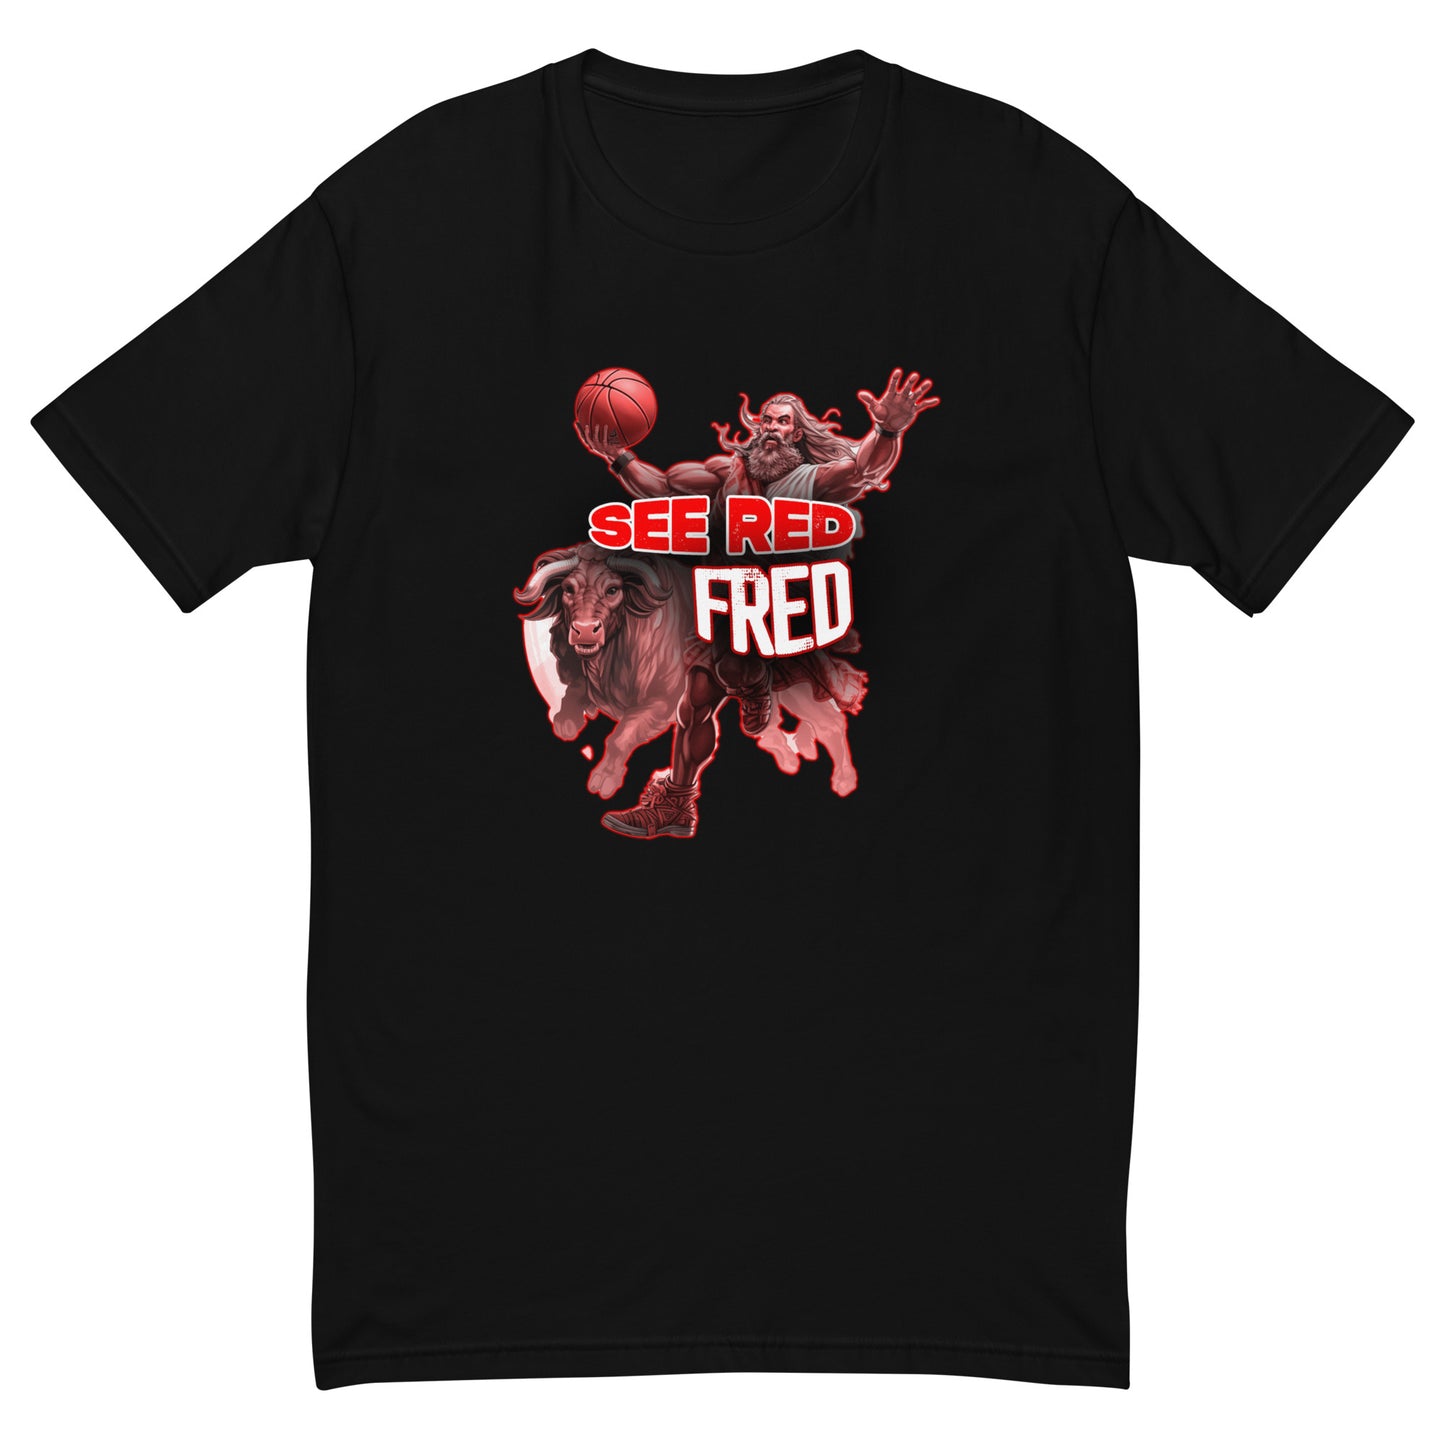 "See Red Fred" Tee